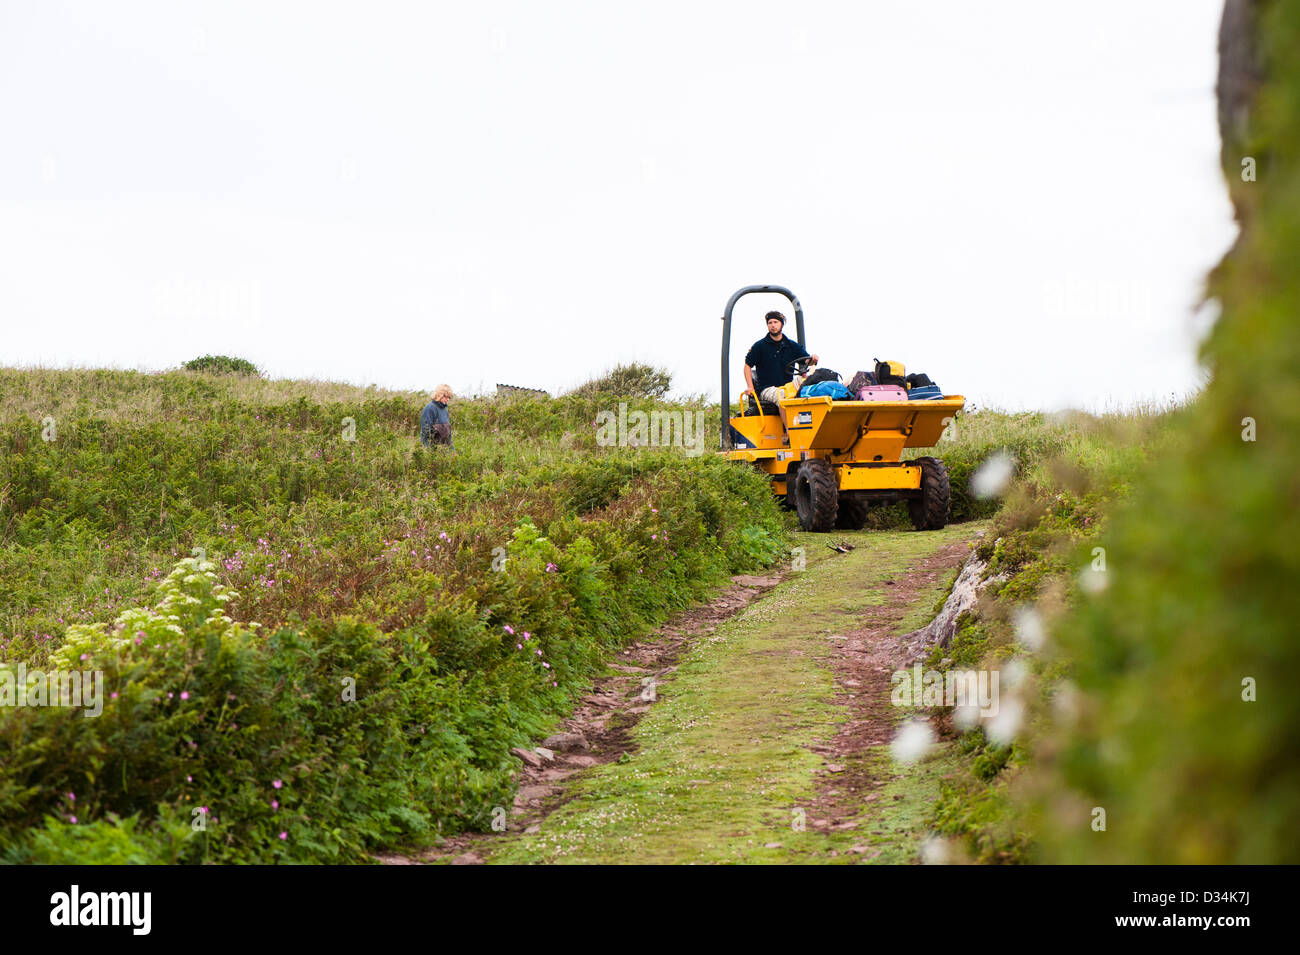 Warden transporting luggage to the landing, Skokholm Island, South Pembrokeshire, Wales, United Kingdom Stock Photo